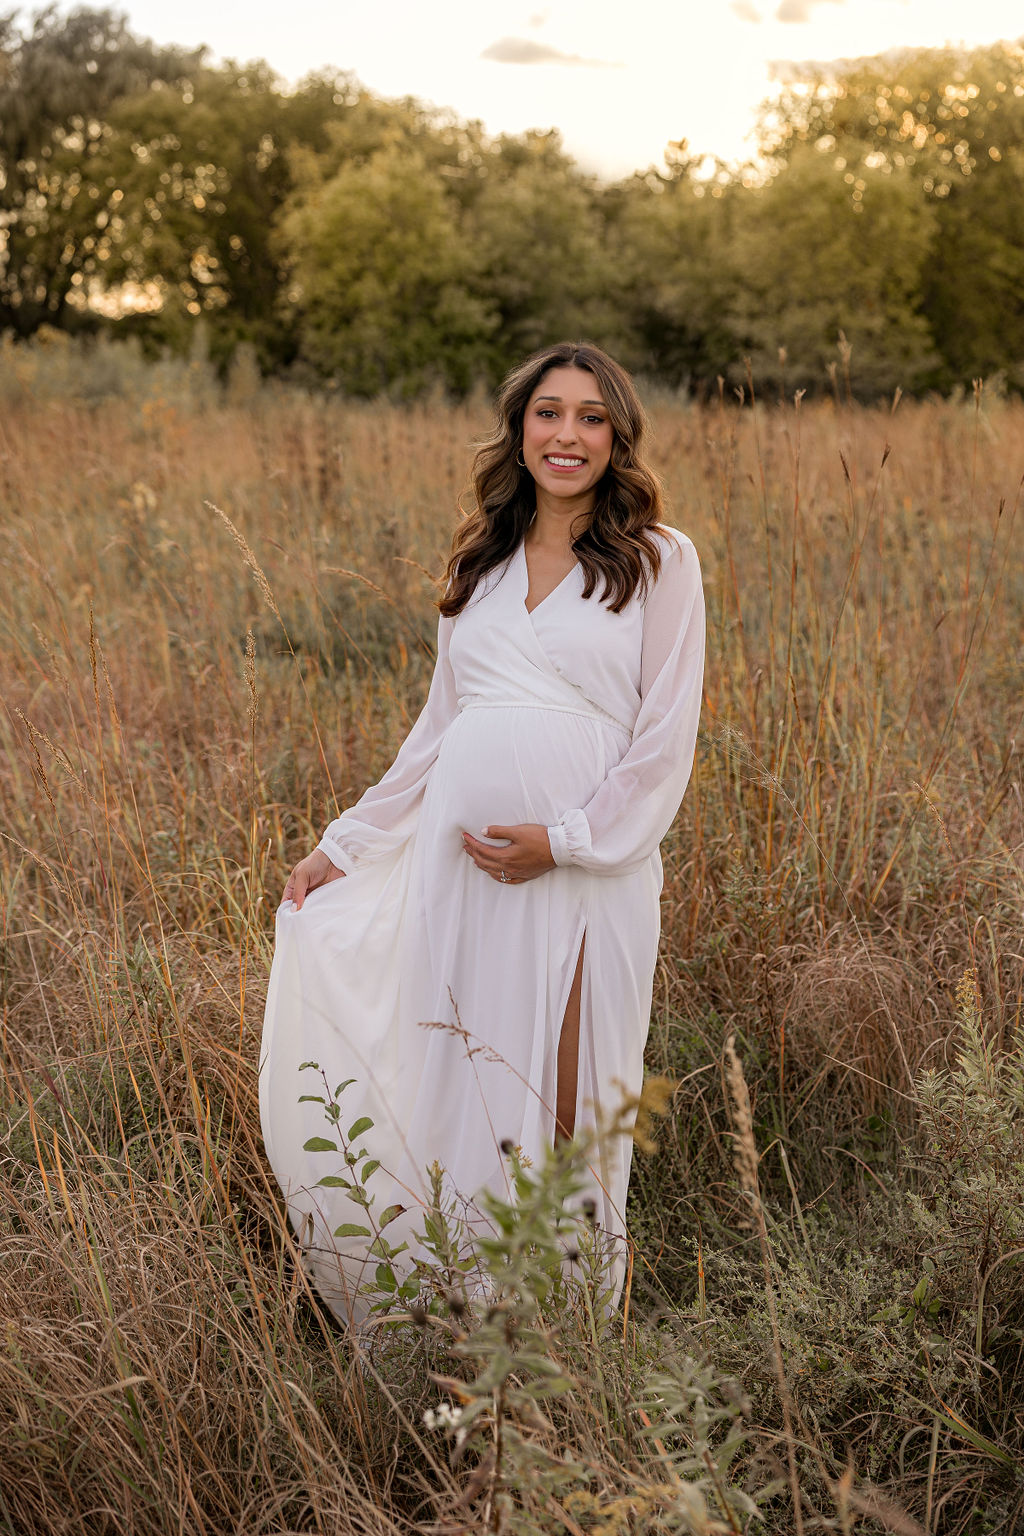 A mother to be holds her dress while walking through a field of golden grass at sunset